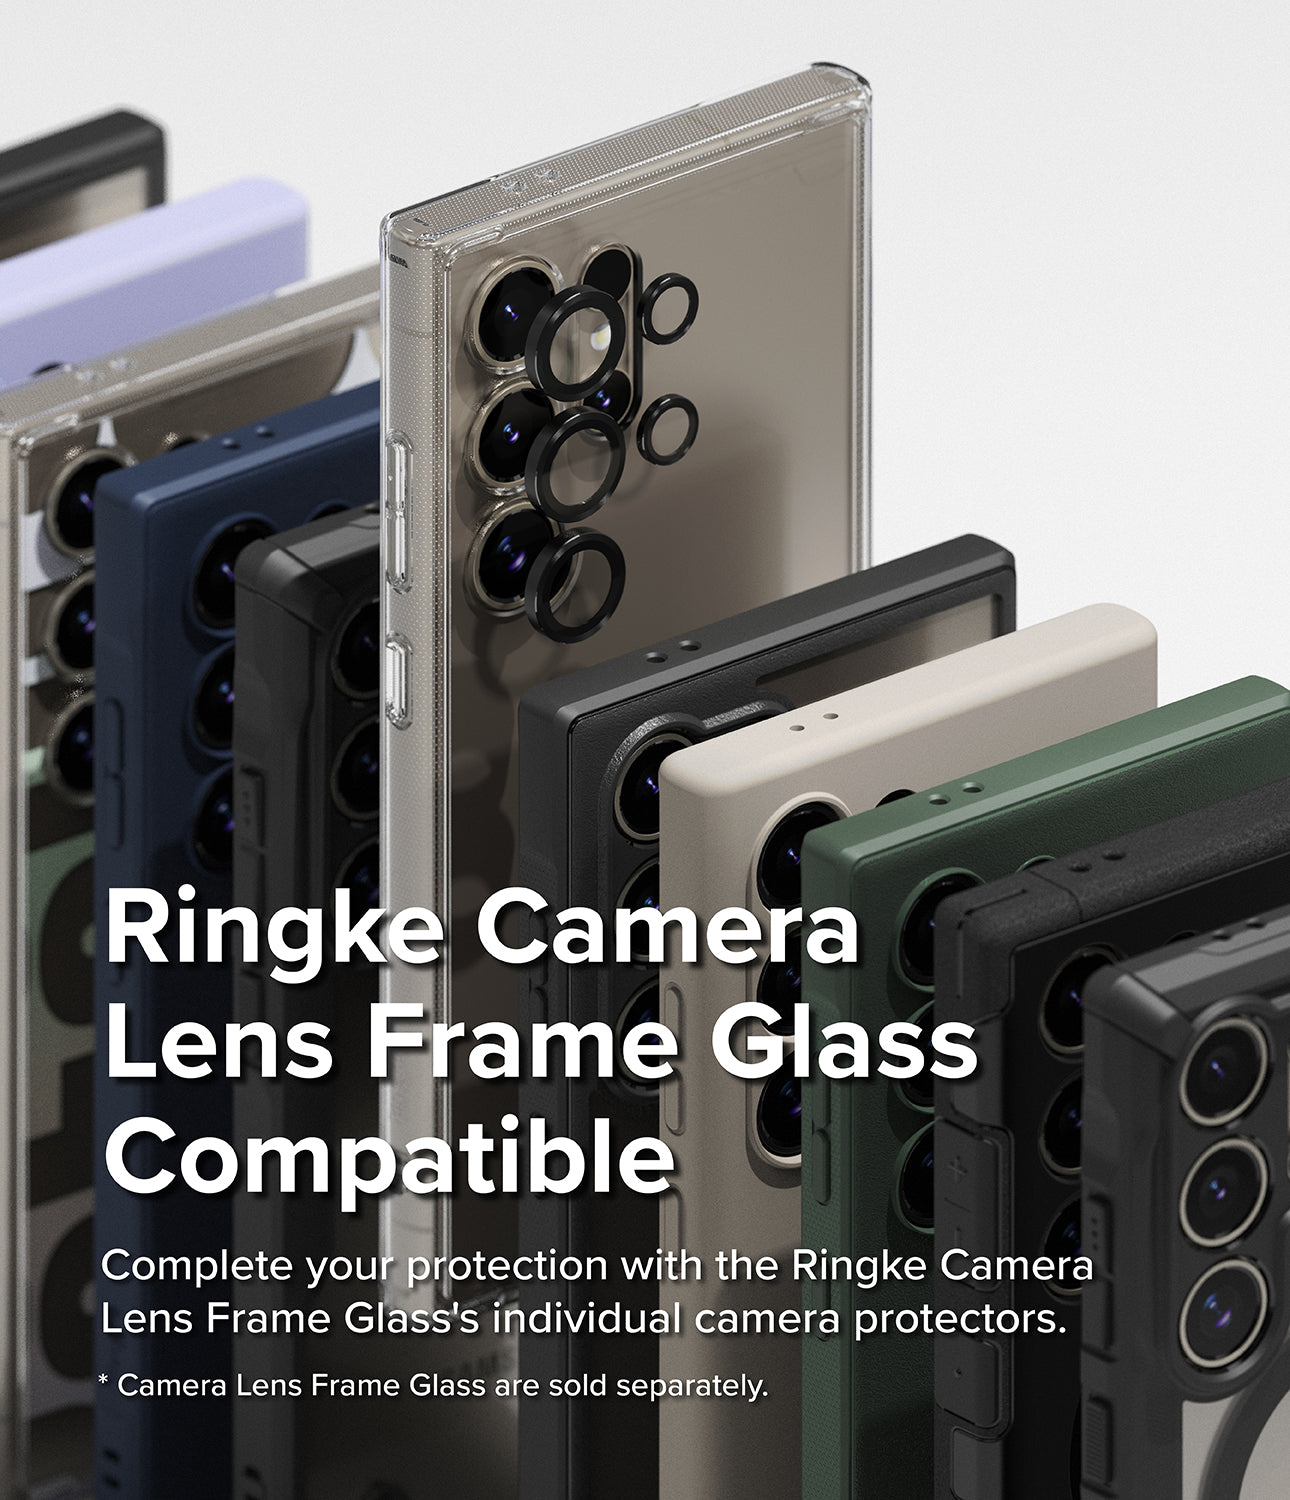 Galaxy S24 Ultra Case | Fusion Design - Ringke Camera Lens Frame Glass Compatible. Complete your protection with the Ringke Camera Lens Frame Glass' individual camera protectors